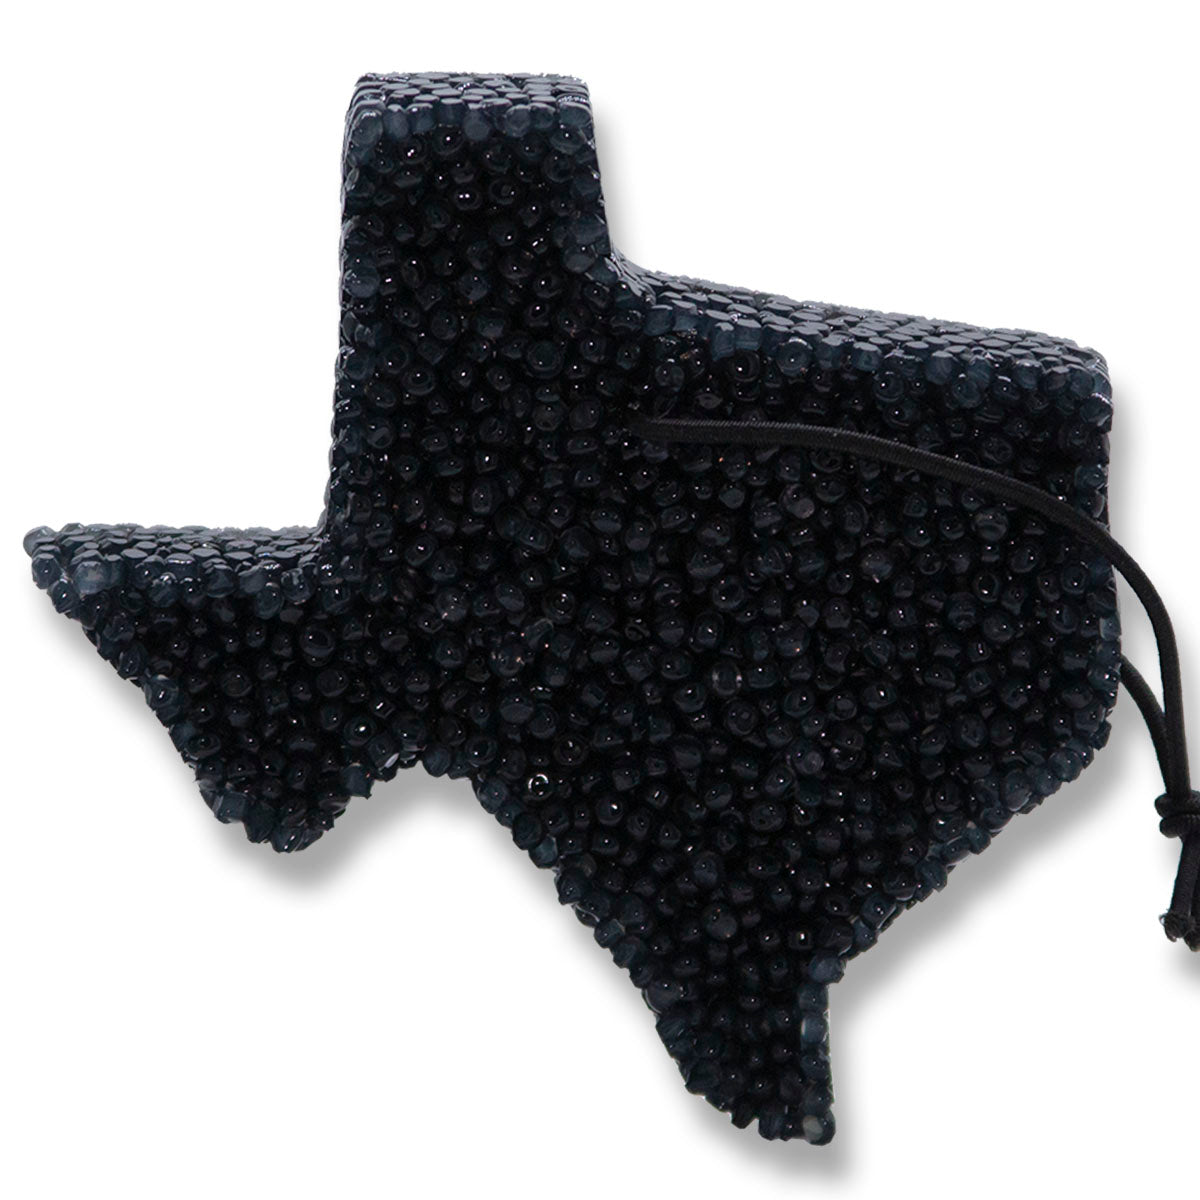 Leather and Lace, Lone Star Candles and More’s Original Aroma of Genuine Leather and Creamy Vanilla, Car & Air Freshener, USA Made in Texas, Black Texas State 1-Pack